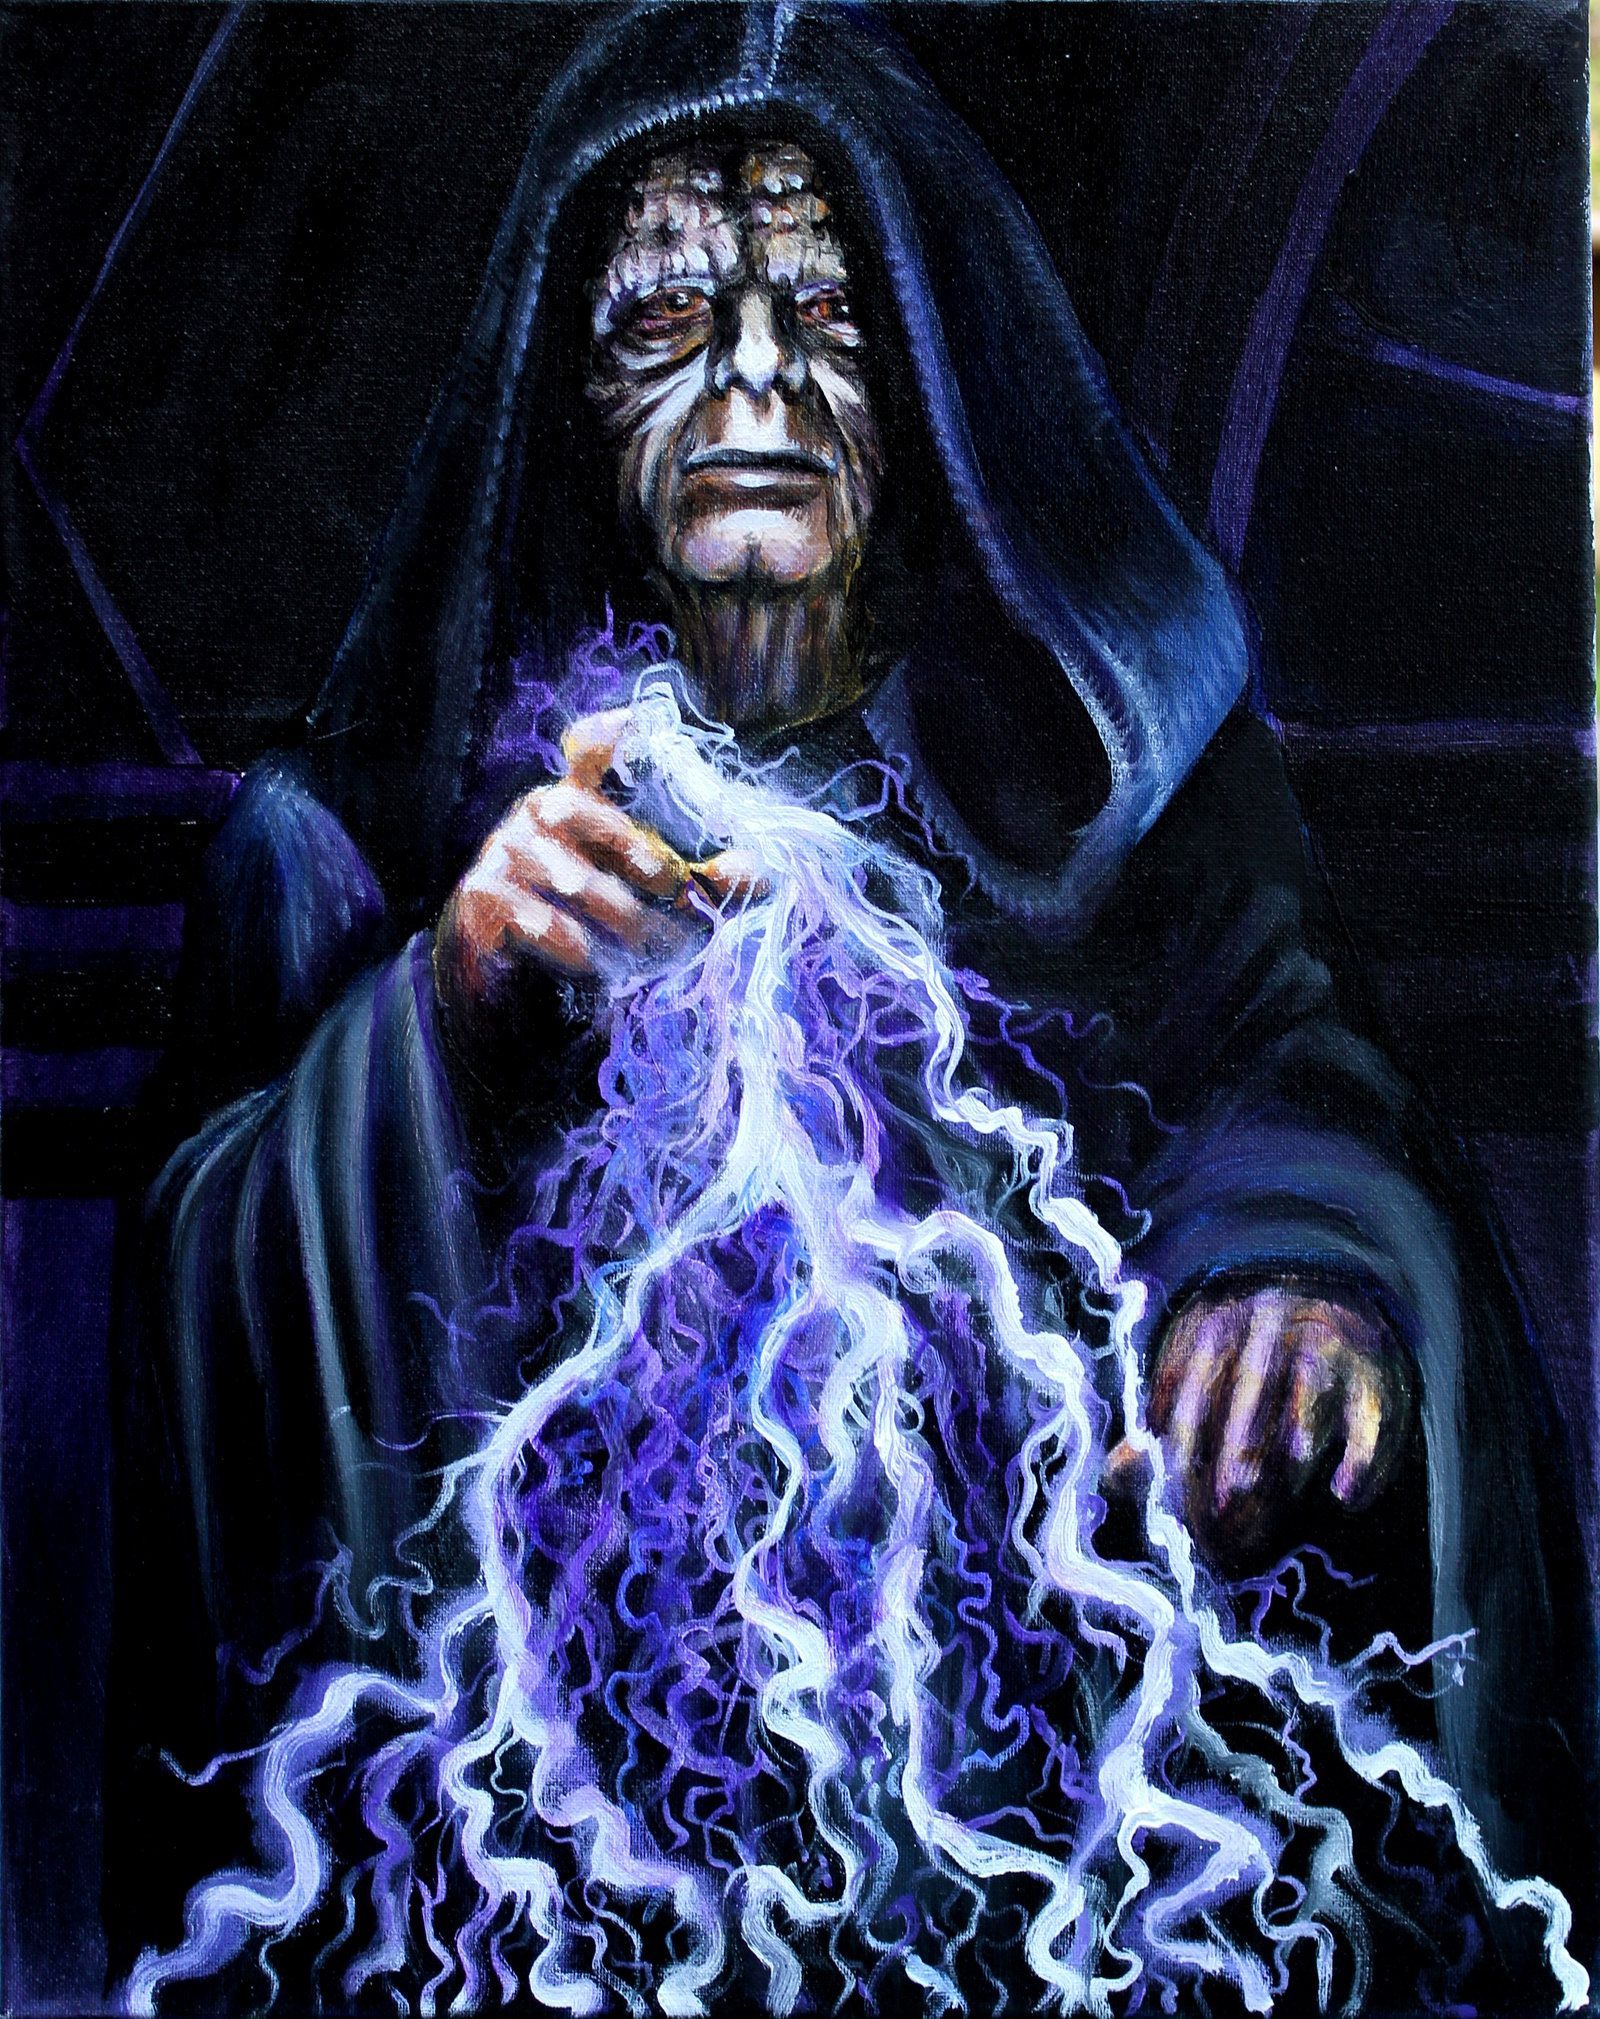 Emperor Palpatine, Darth Sidious. Star wars image, Star wars picture, Star wars poster